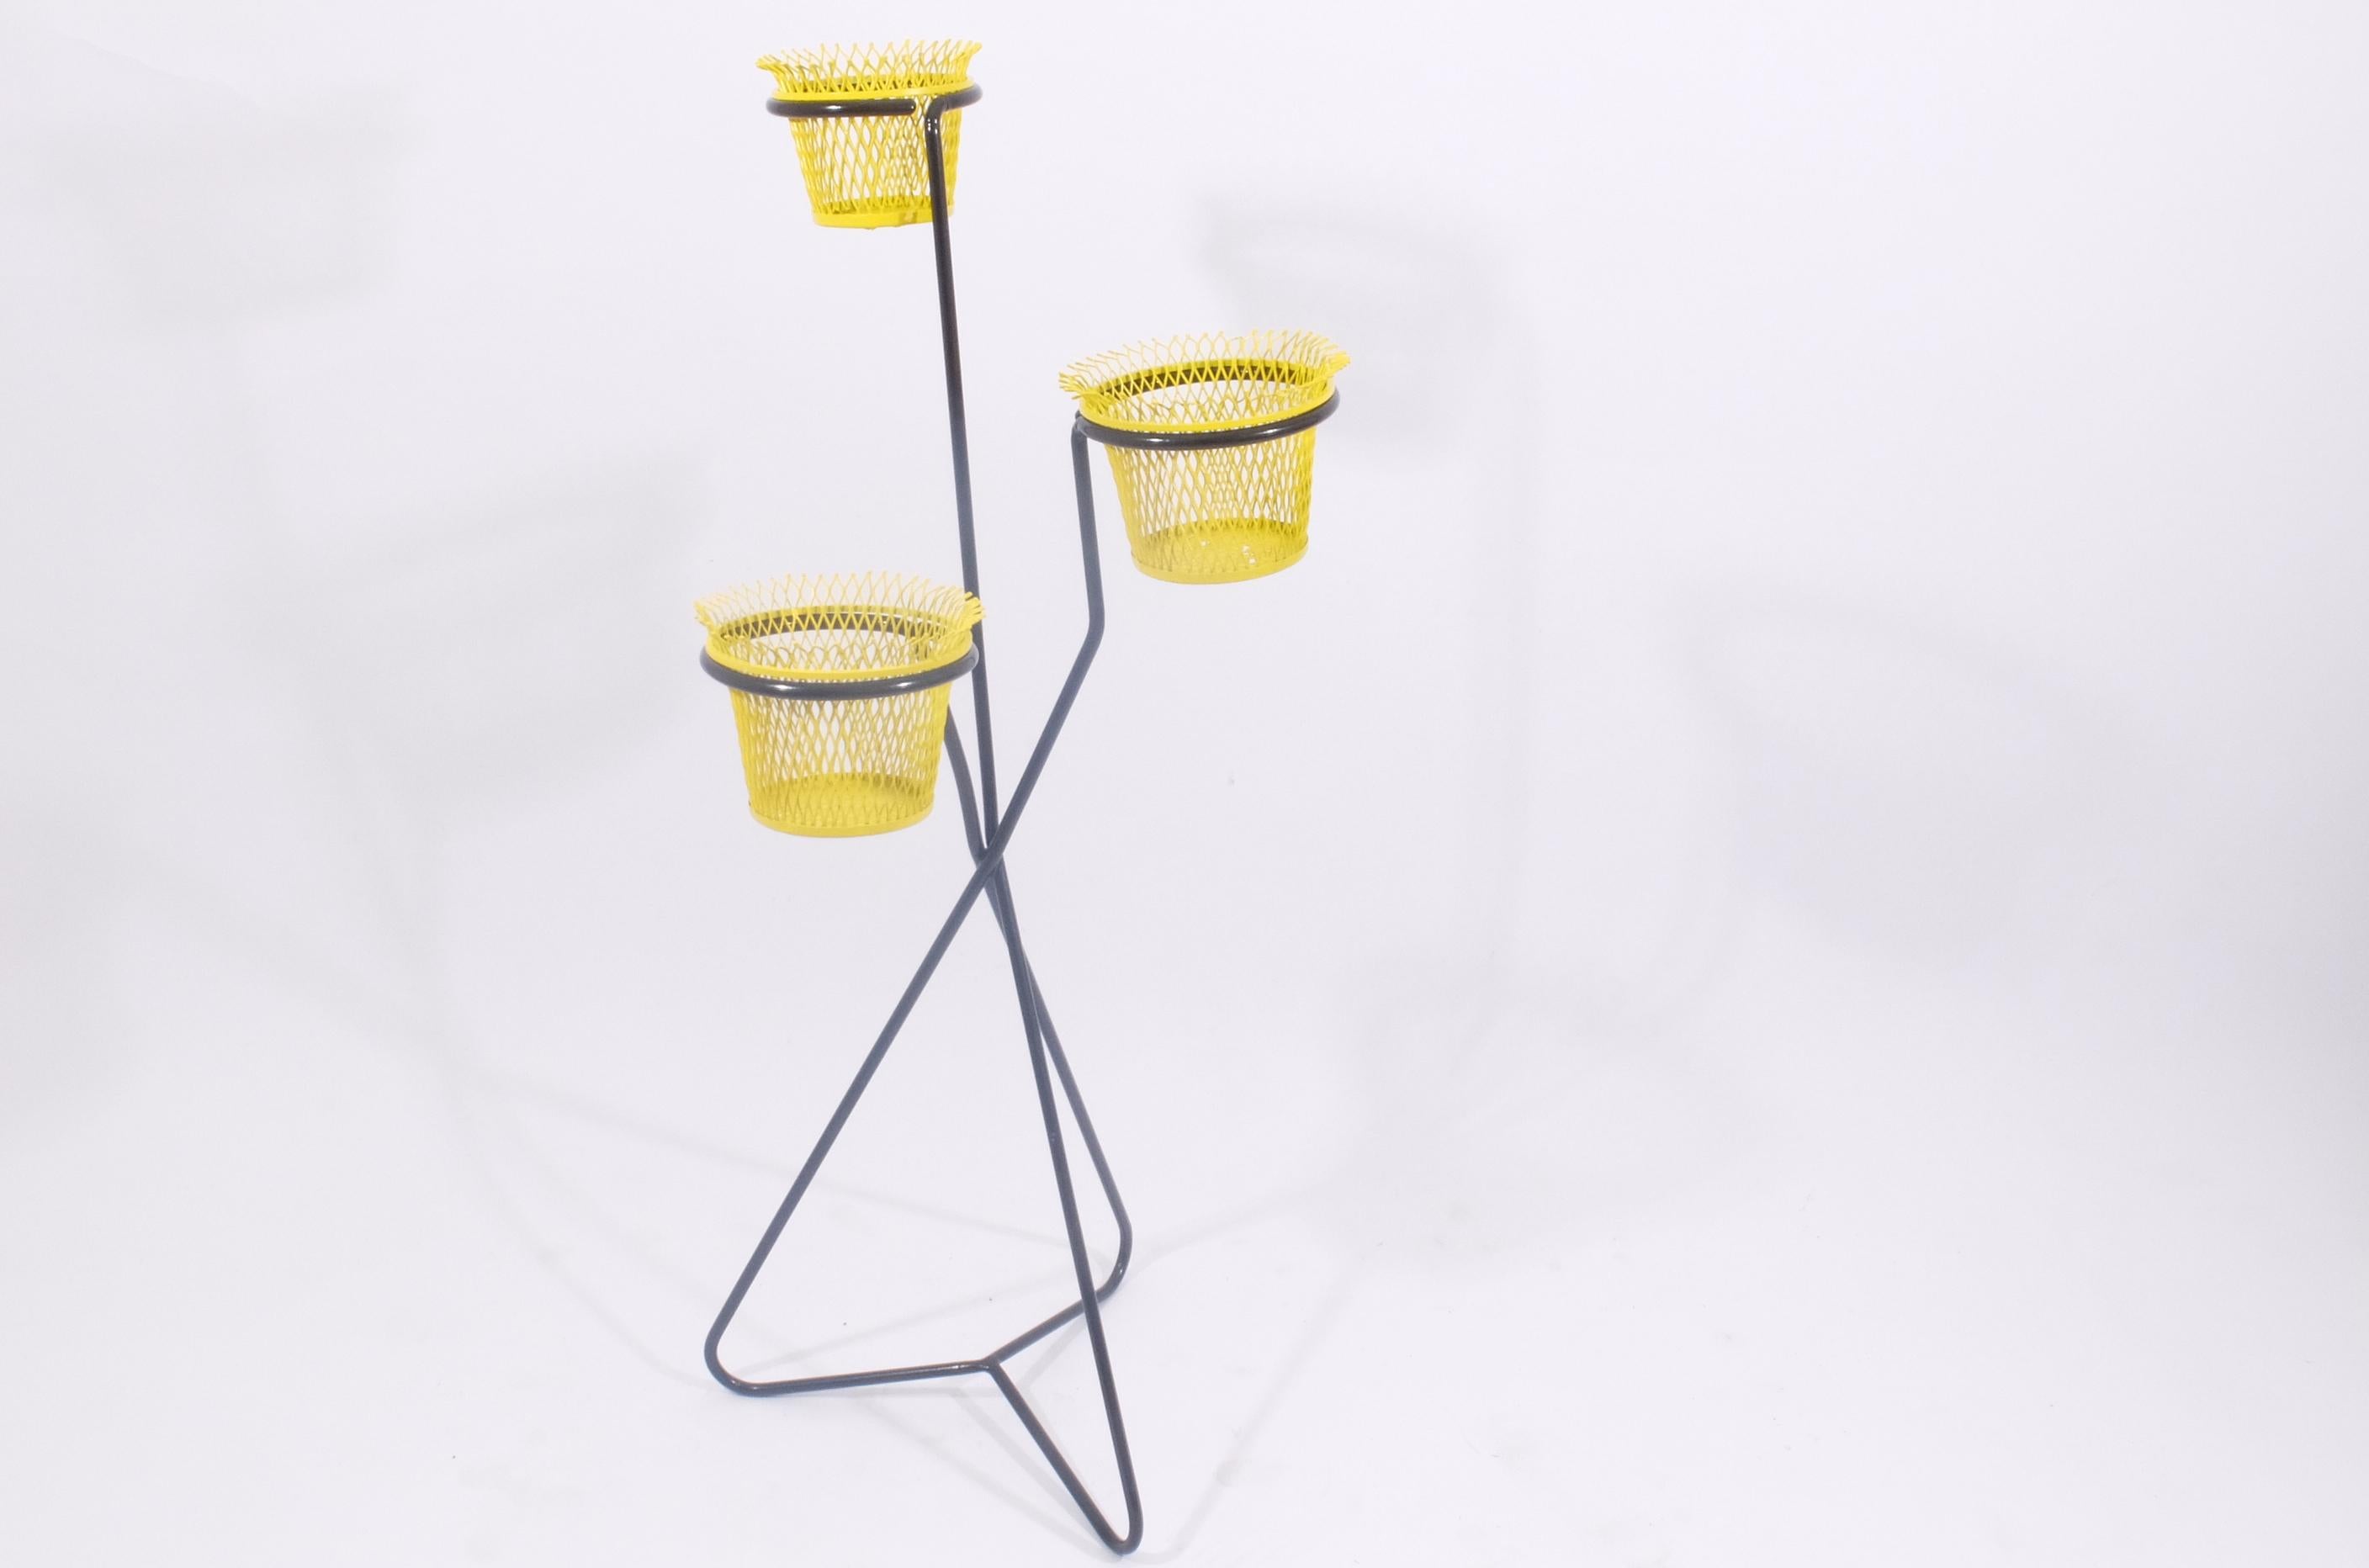 Triple plant stand in yellow and black metal expanded.
Manufactured by 